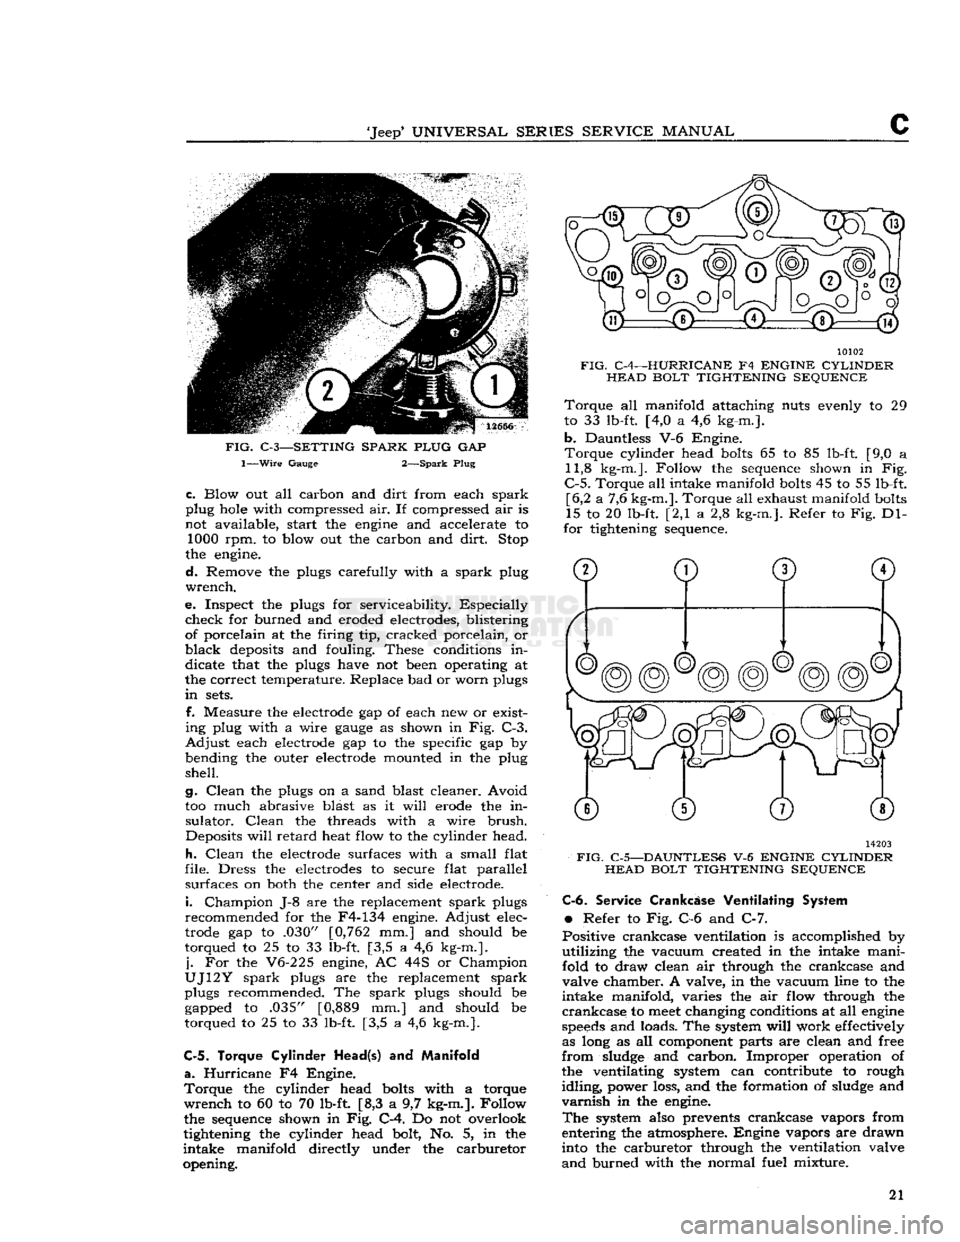 JEEP CJ 1953 Owners Manual 
Jeep
 UNIVERSAL SERIES SERVICE
 MANUAL 

FIG.
 C-3—SETTING SPARK PLUG
 GAP 
 1—Wire
 Gauge 2—Spark Plug 
 c.
 Blow out all carbon and
 dirt
 from each
 spark 

plug hole with compressed air. 